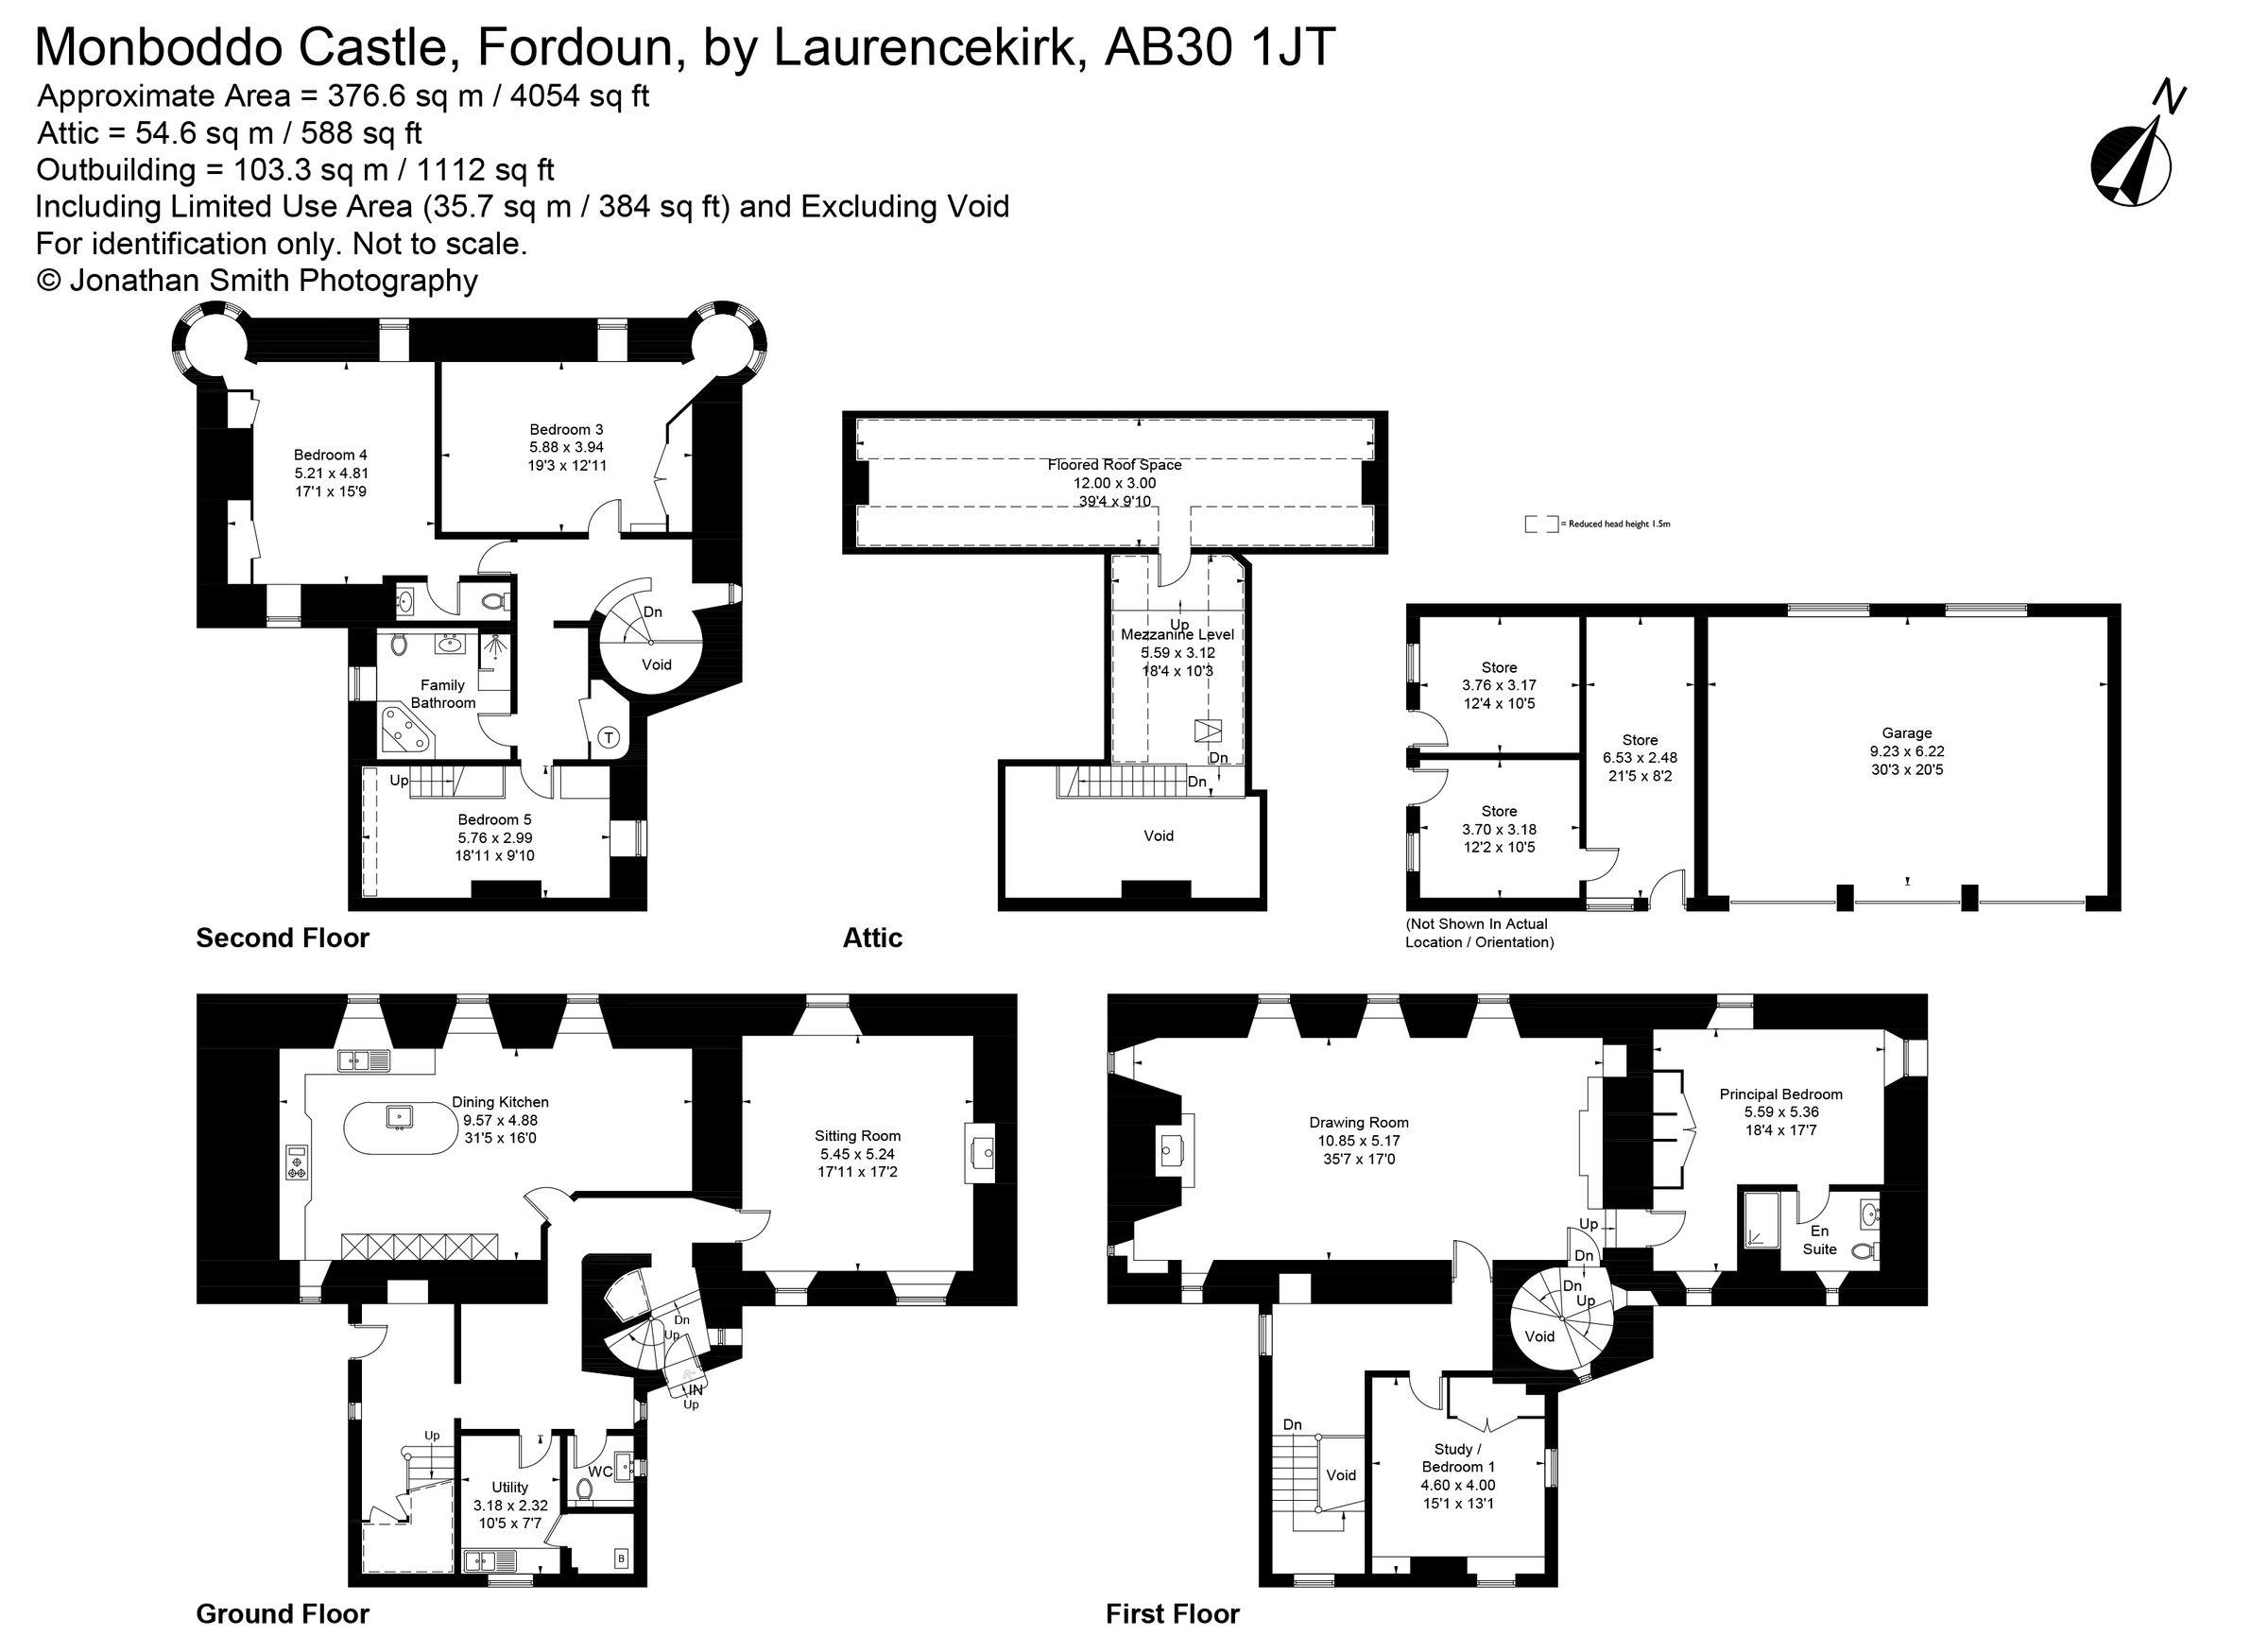 5 bed property for sale in Monboddo Castle, Fordoun, By Laurencekirk ...